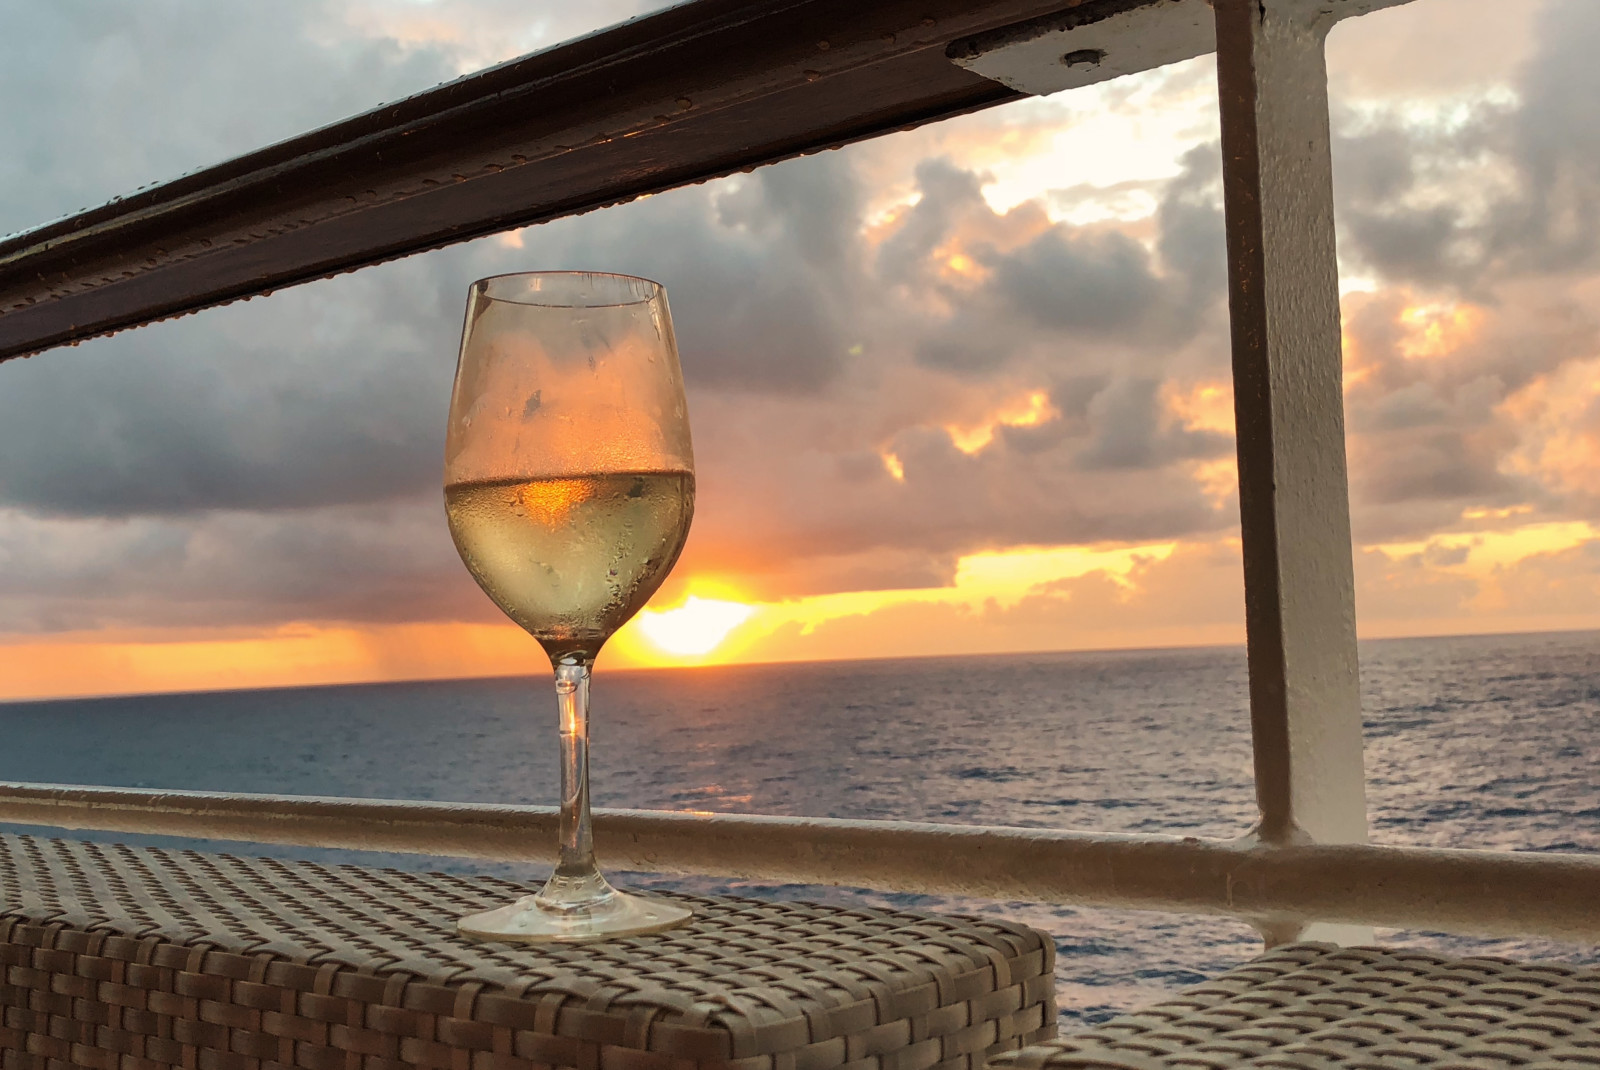 Glass of wine on chair with sunset in the background over body of water